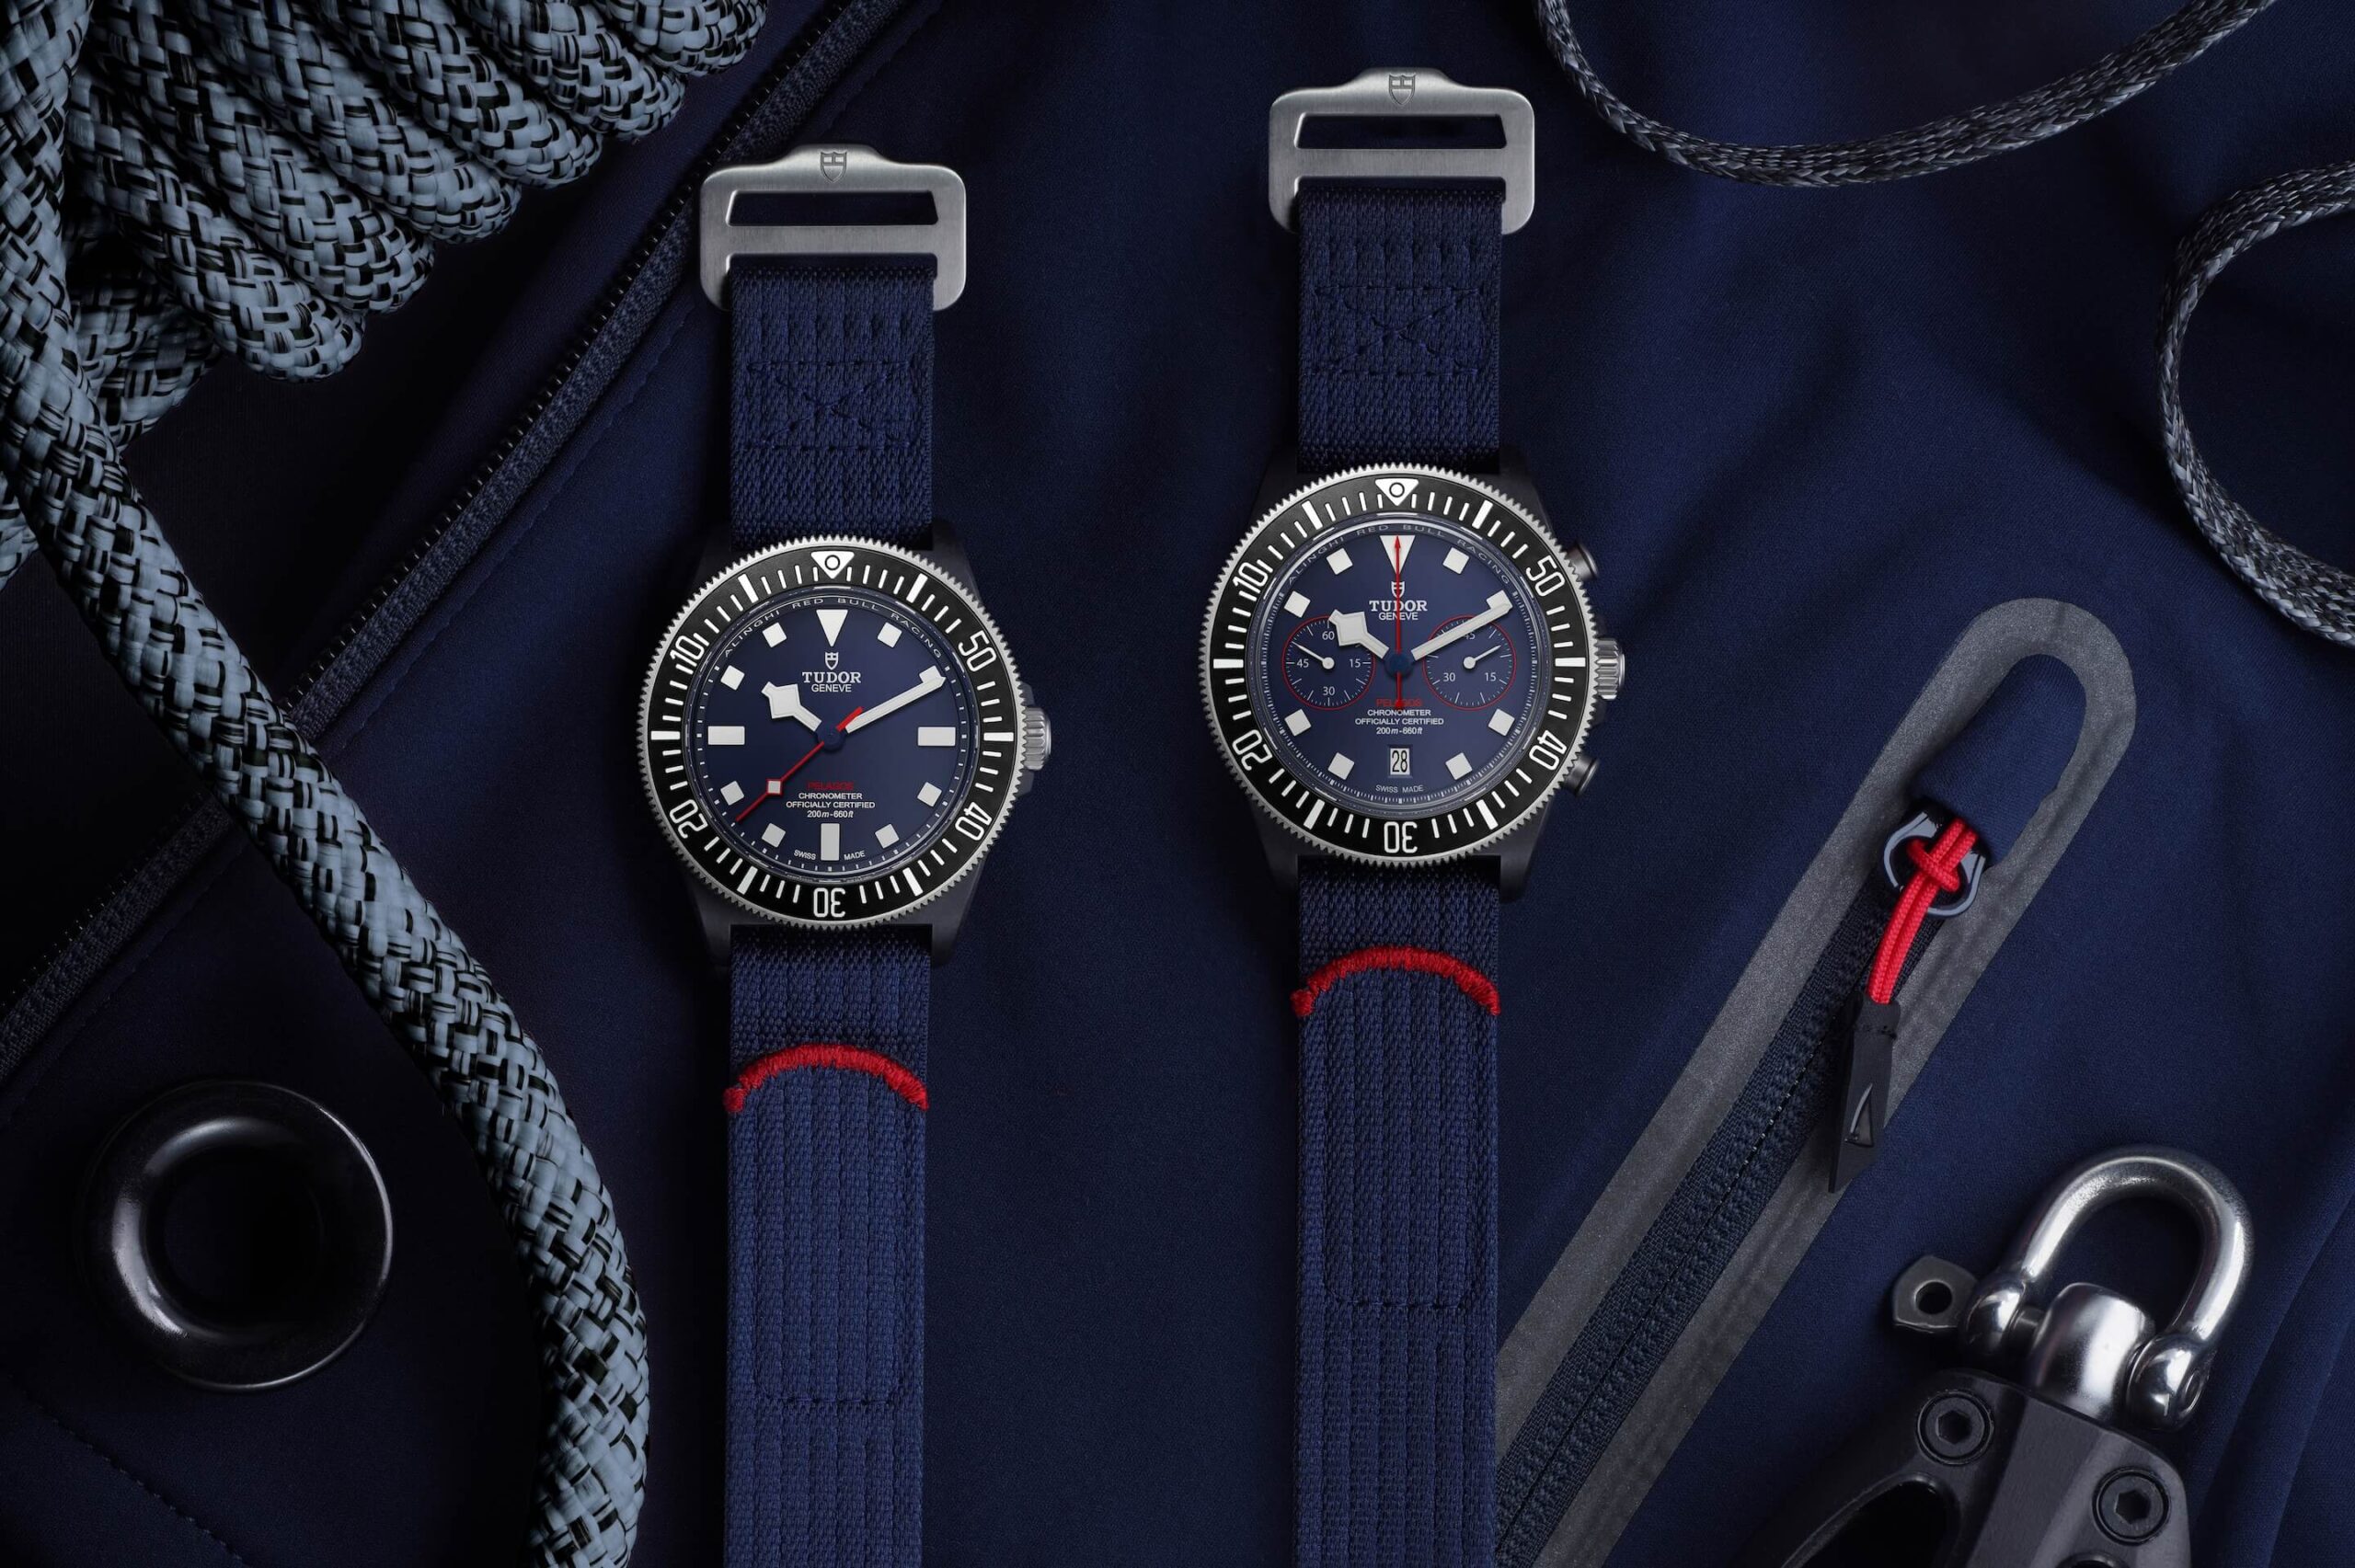 The Pelagos FXD time-only variation (left) along with its chronograph counterpart (right)